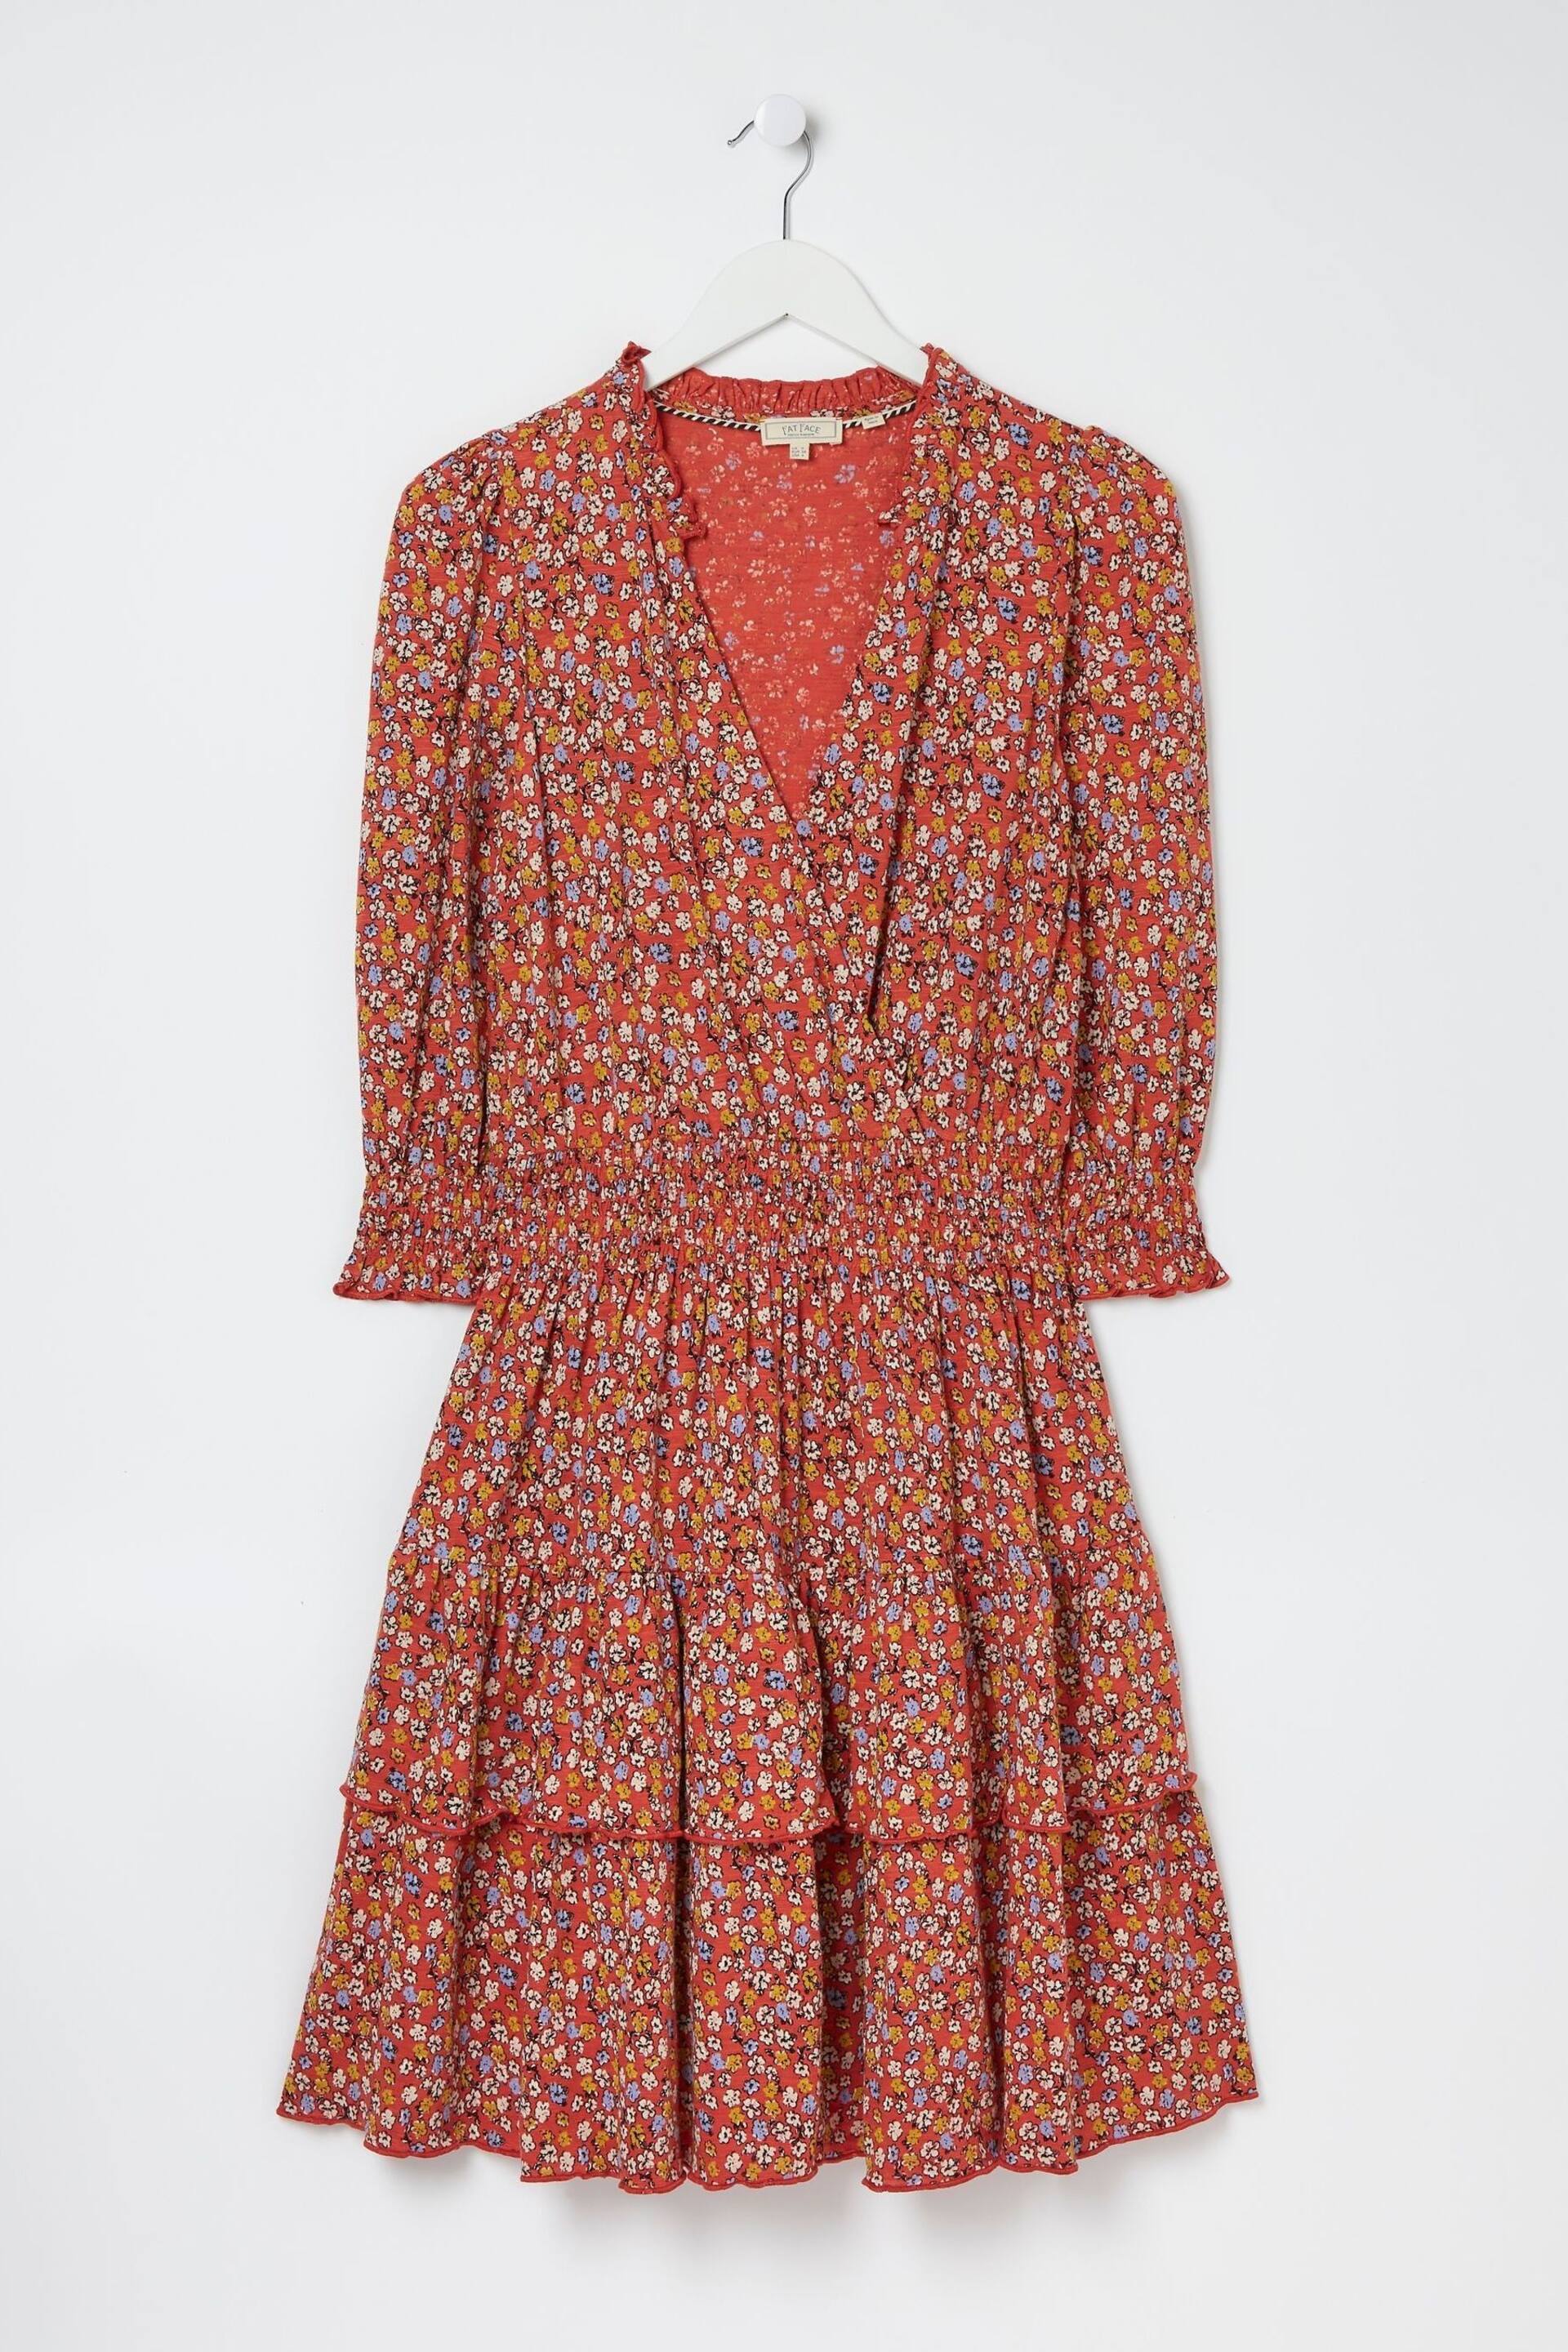 FatFace Red Amba Gradient Floral Jersey Dress - Image 5 of 5